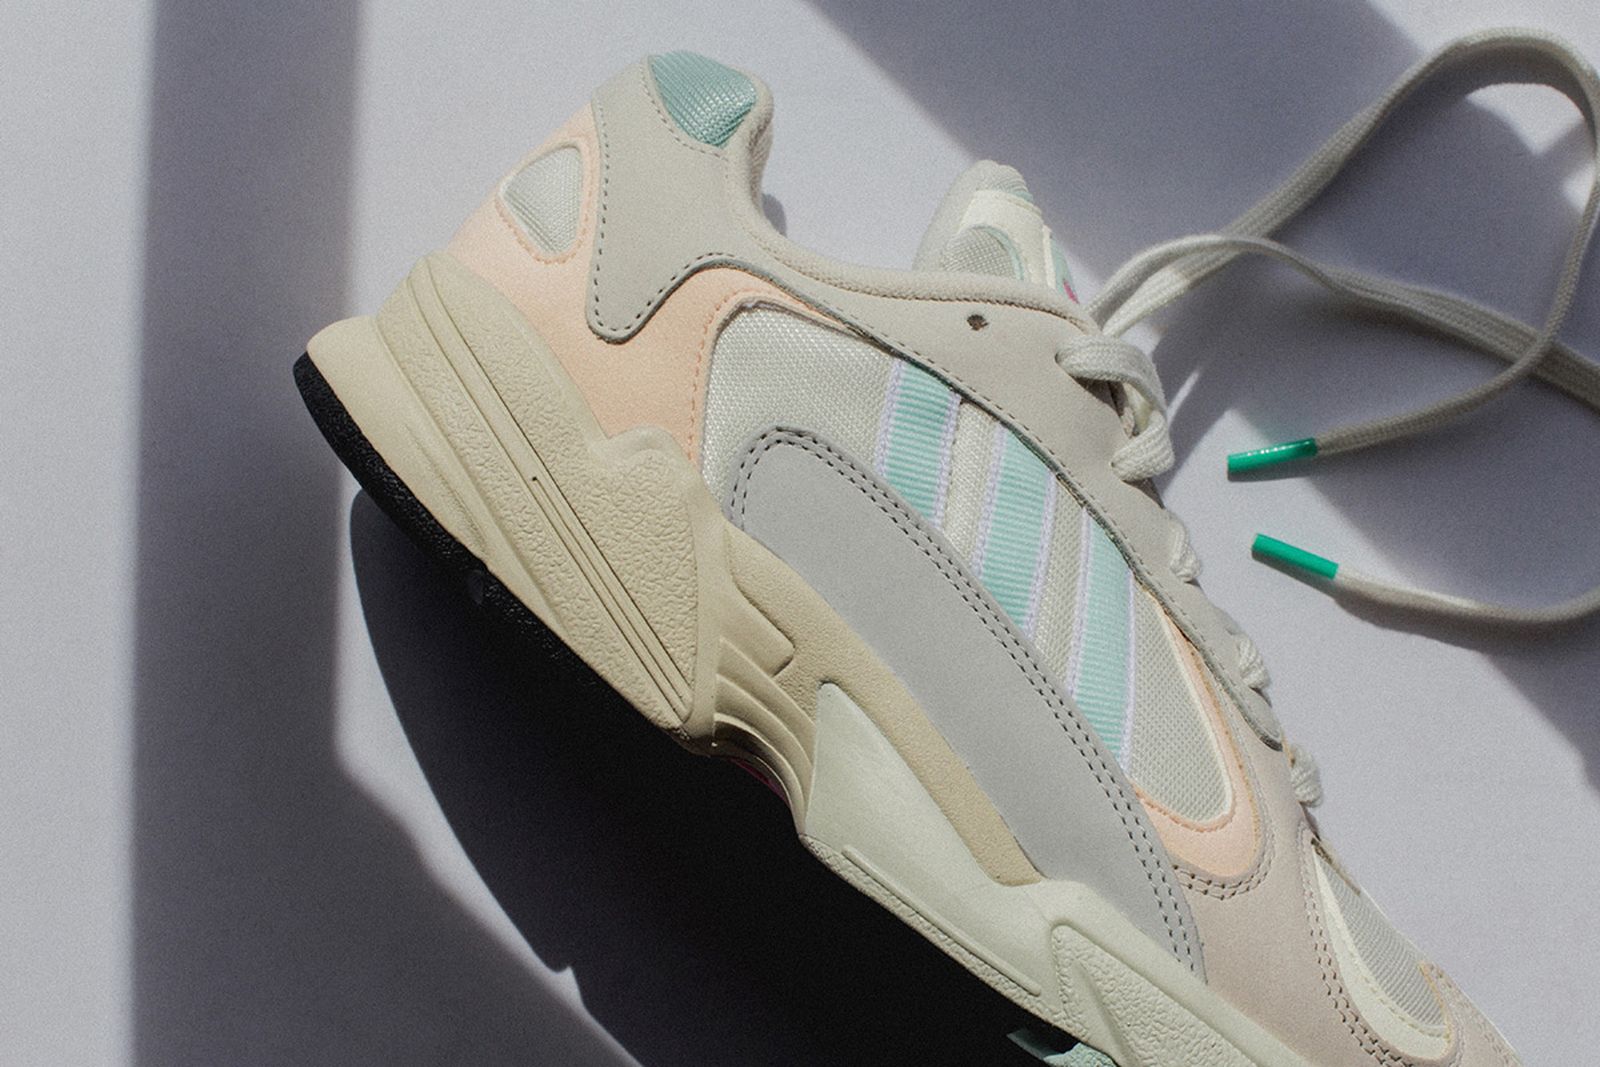 adidas originals yung 1 ice mint release date price adidas Originals Yung-1